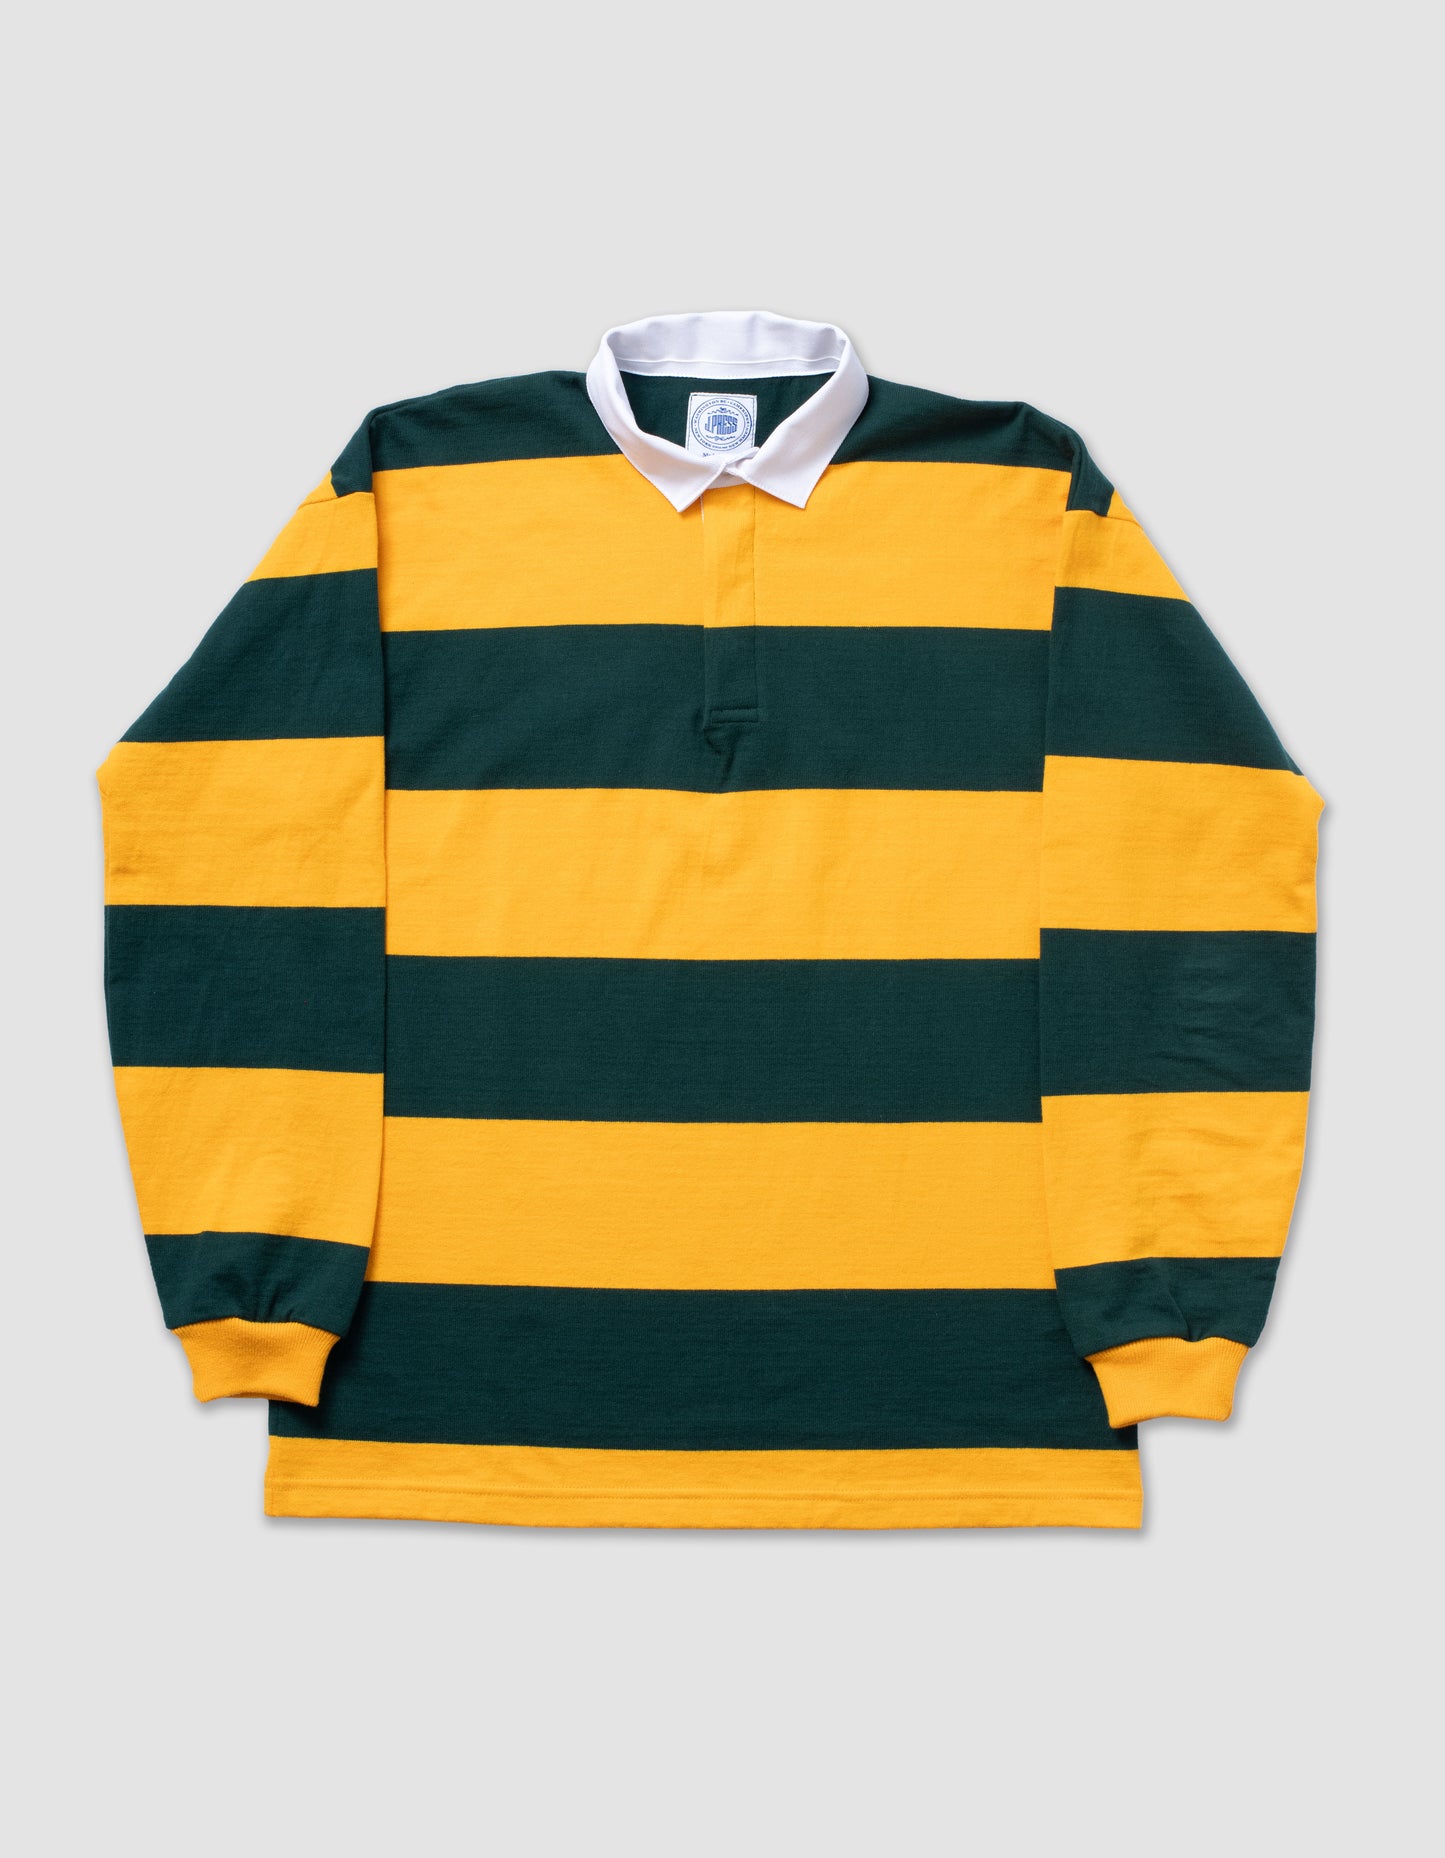 CLASSIC STRIPE RUGBY SHIRT - GOLD/EVERGREEN